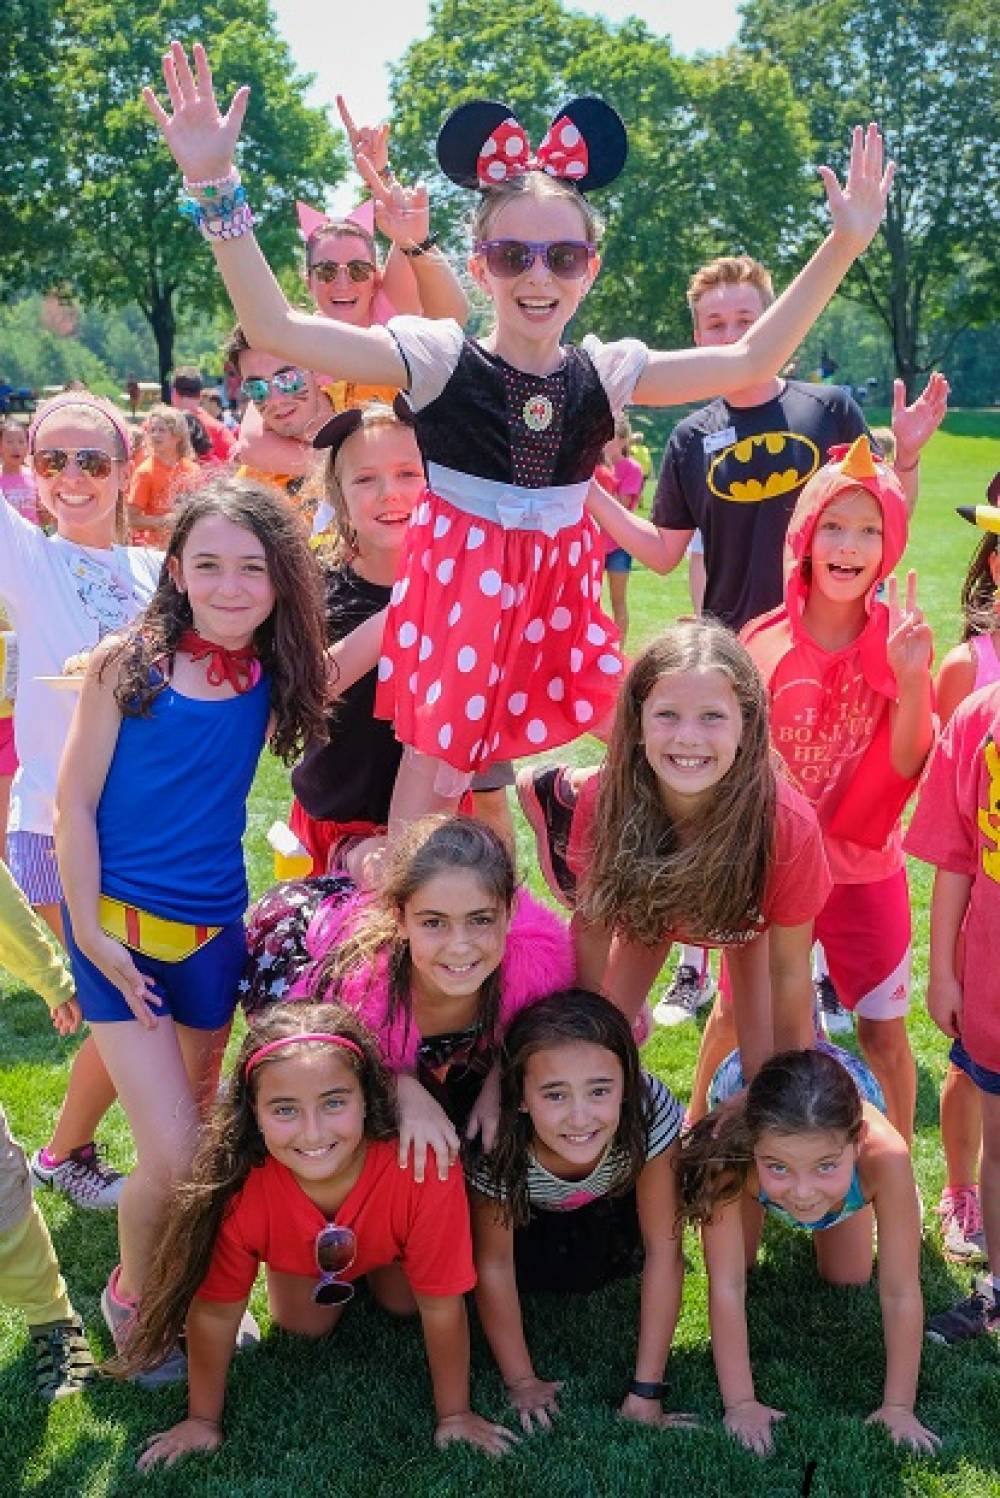 TOP MASSACHUSETTS SUMMER CAMP: Nobles Day Camp is a Top Summer Camp located in Dedham Massachusetts offering many fun and enriching camp programs. 